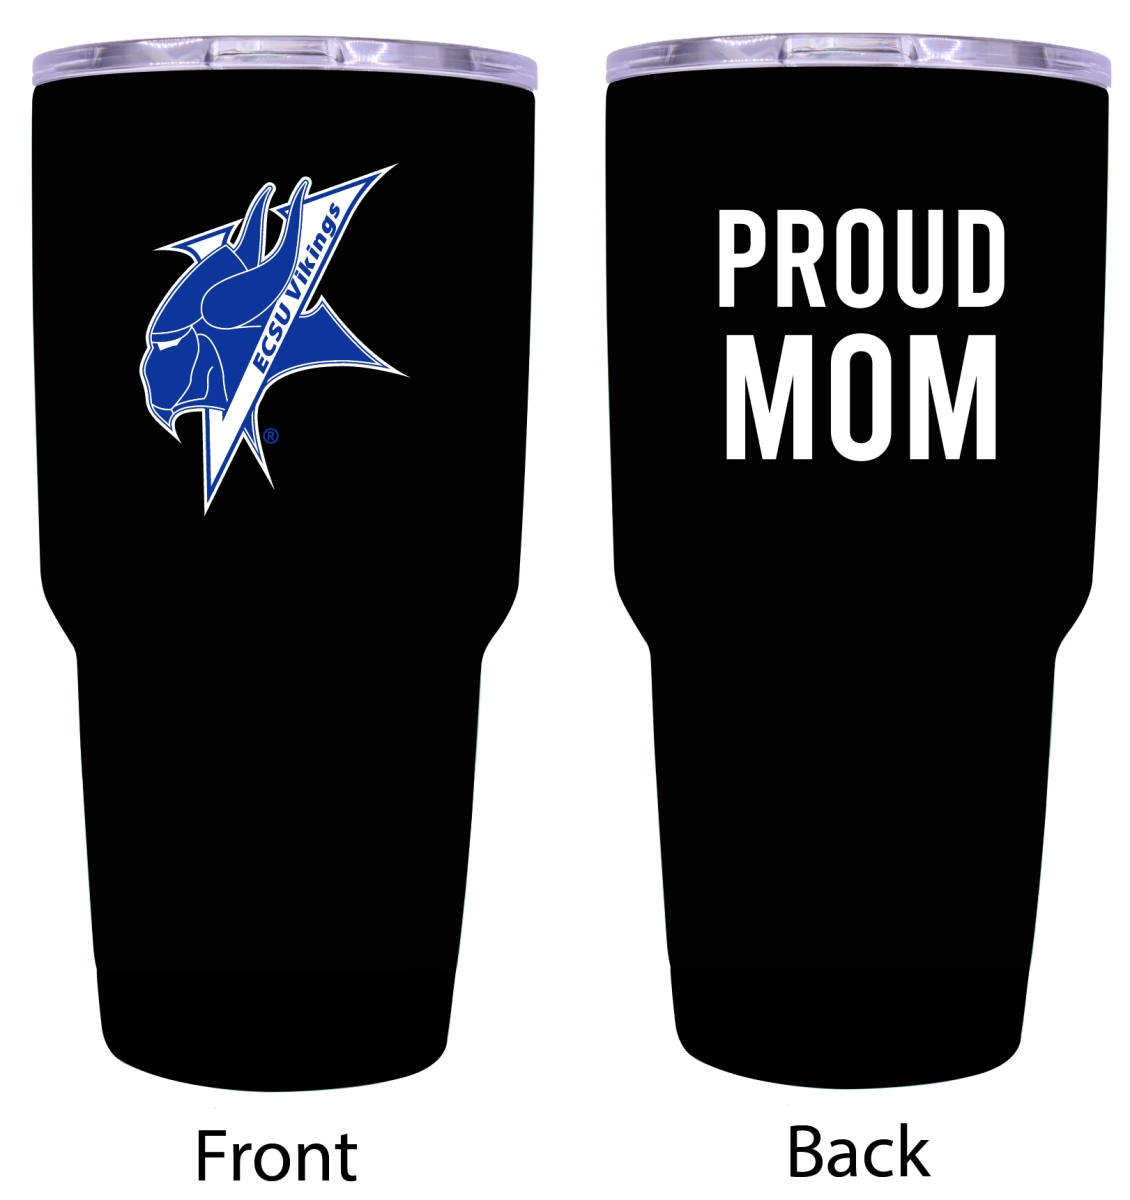 Picture of R & R Imports ITB-C-ELIZ20 MOM Elizabeth City State University Proud Mom 20 oz Insulated Stainless Steel Tumblers